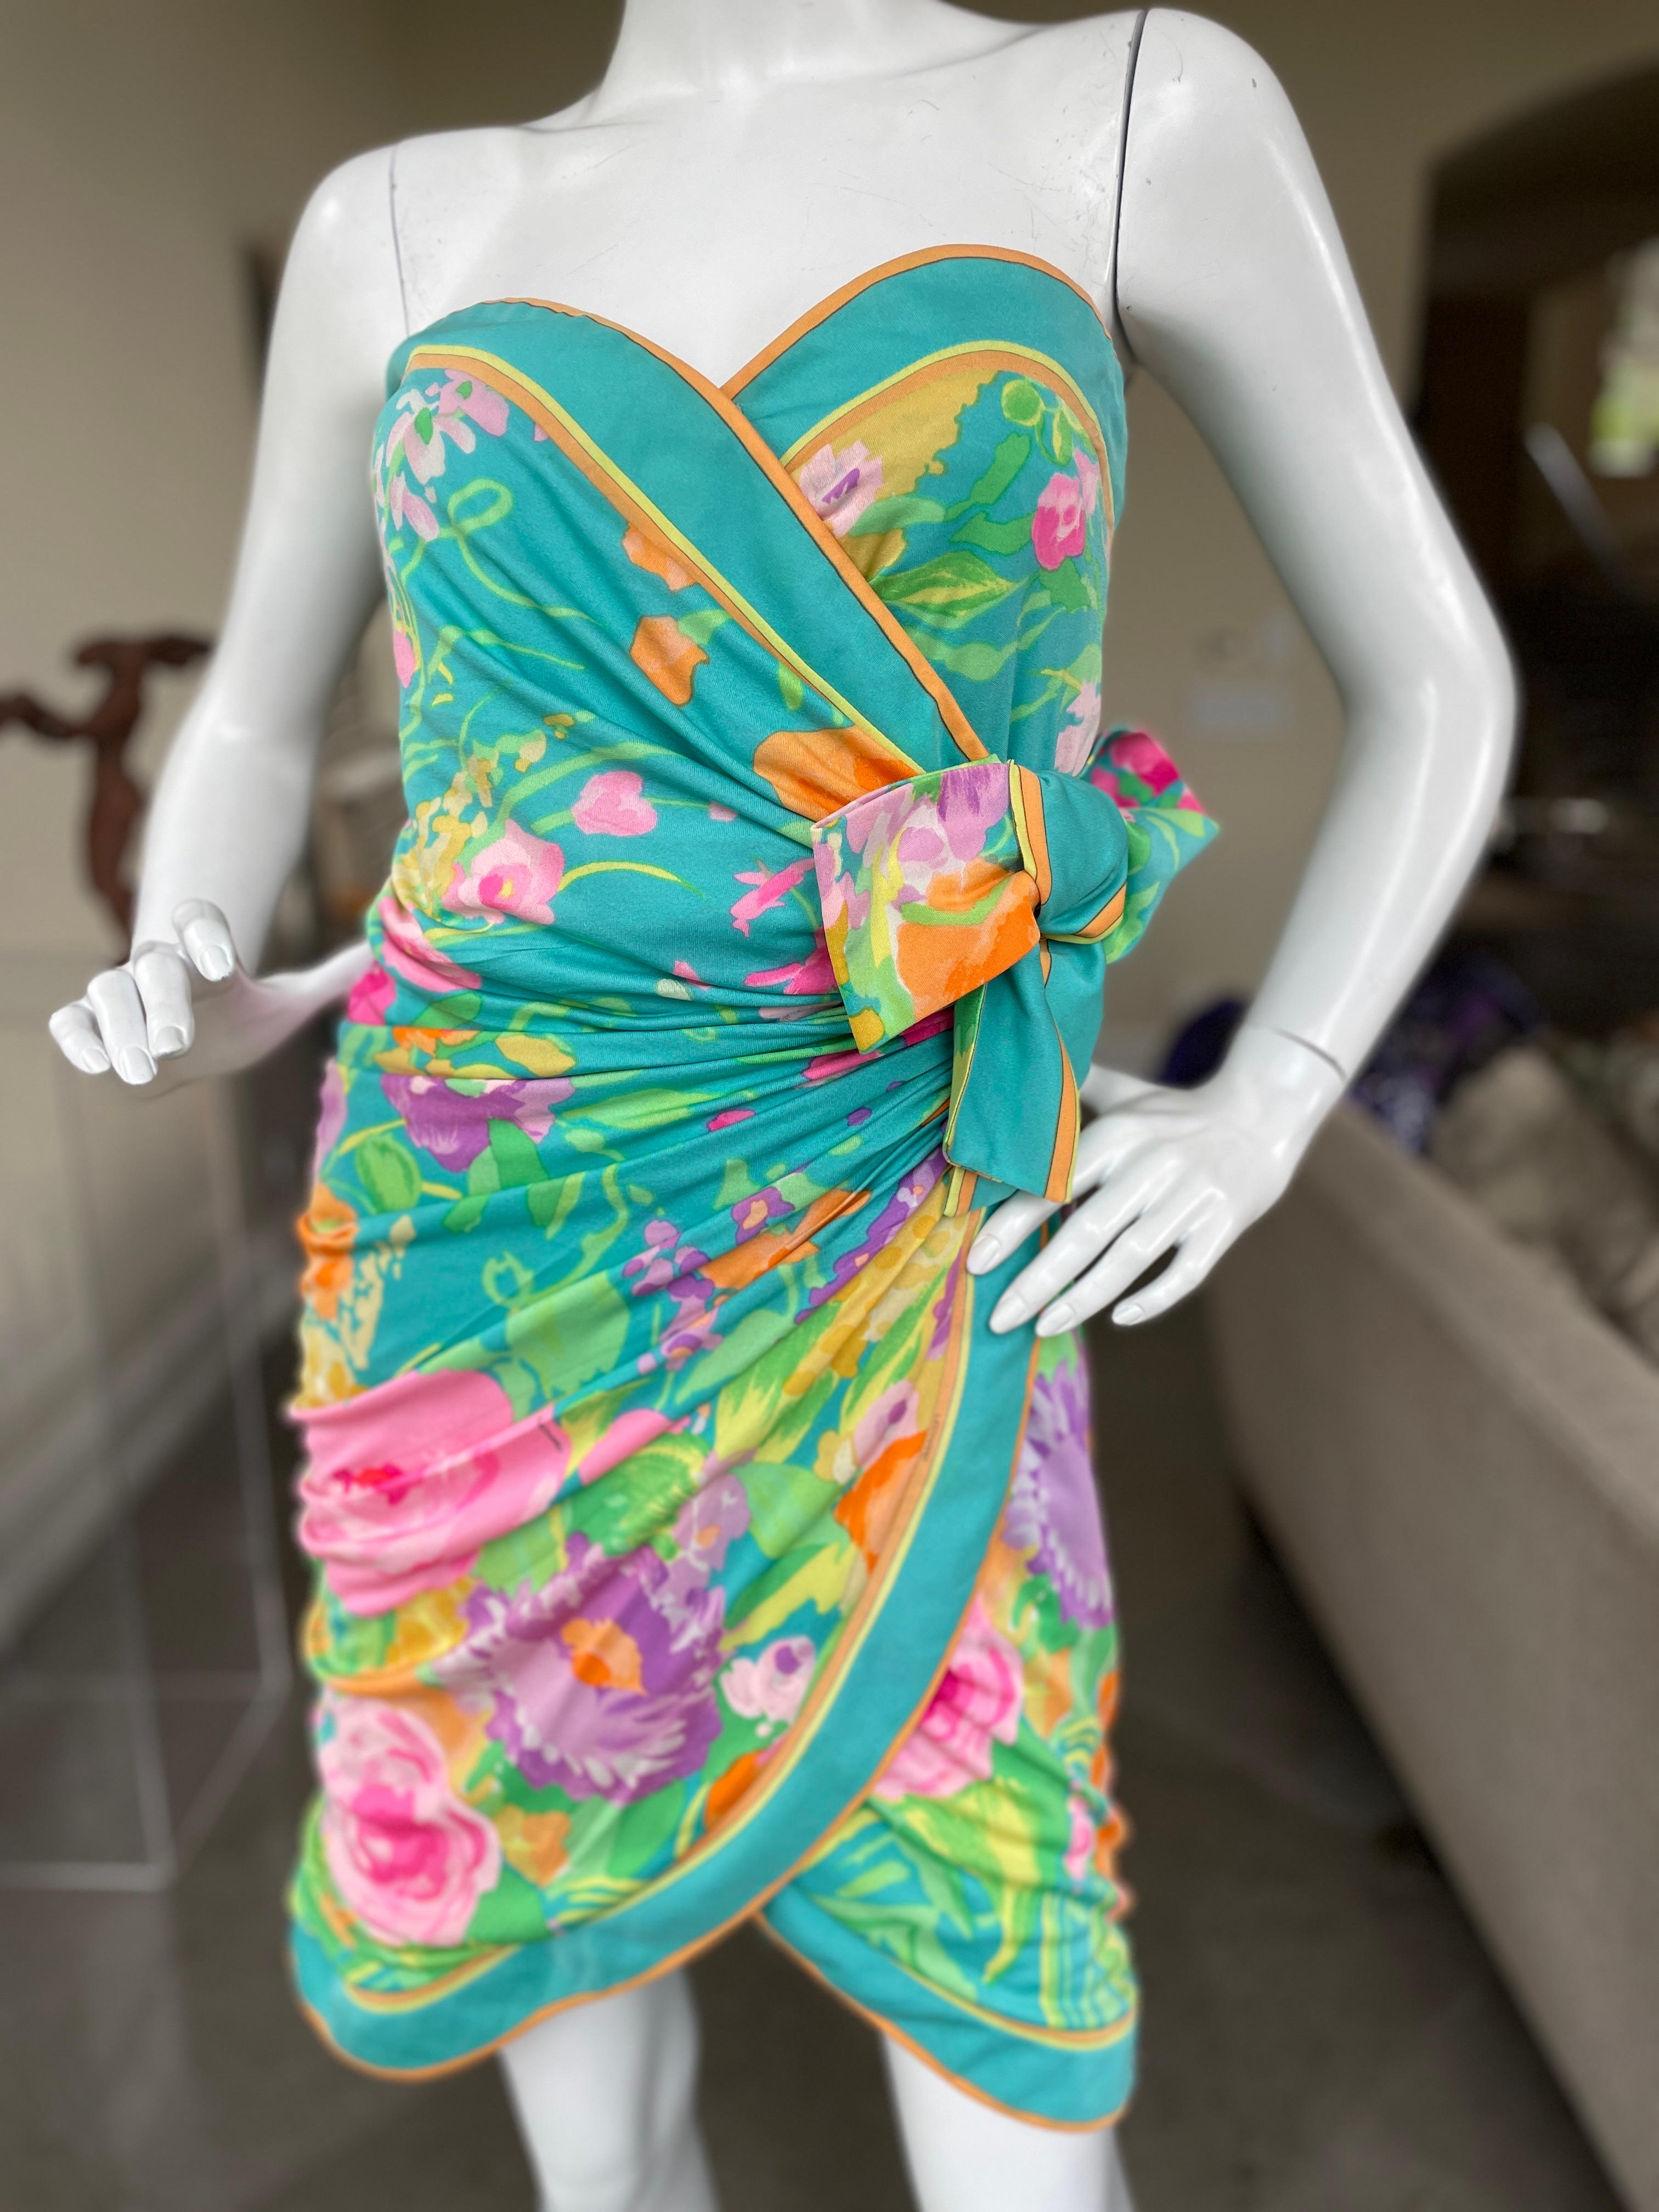 Leonard Paris Vintage Floral Wrap Style Shirred Silk Strapless Cocktail Dress In Good Condition For Sale In Cloverdale, CA